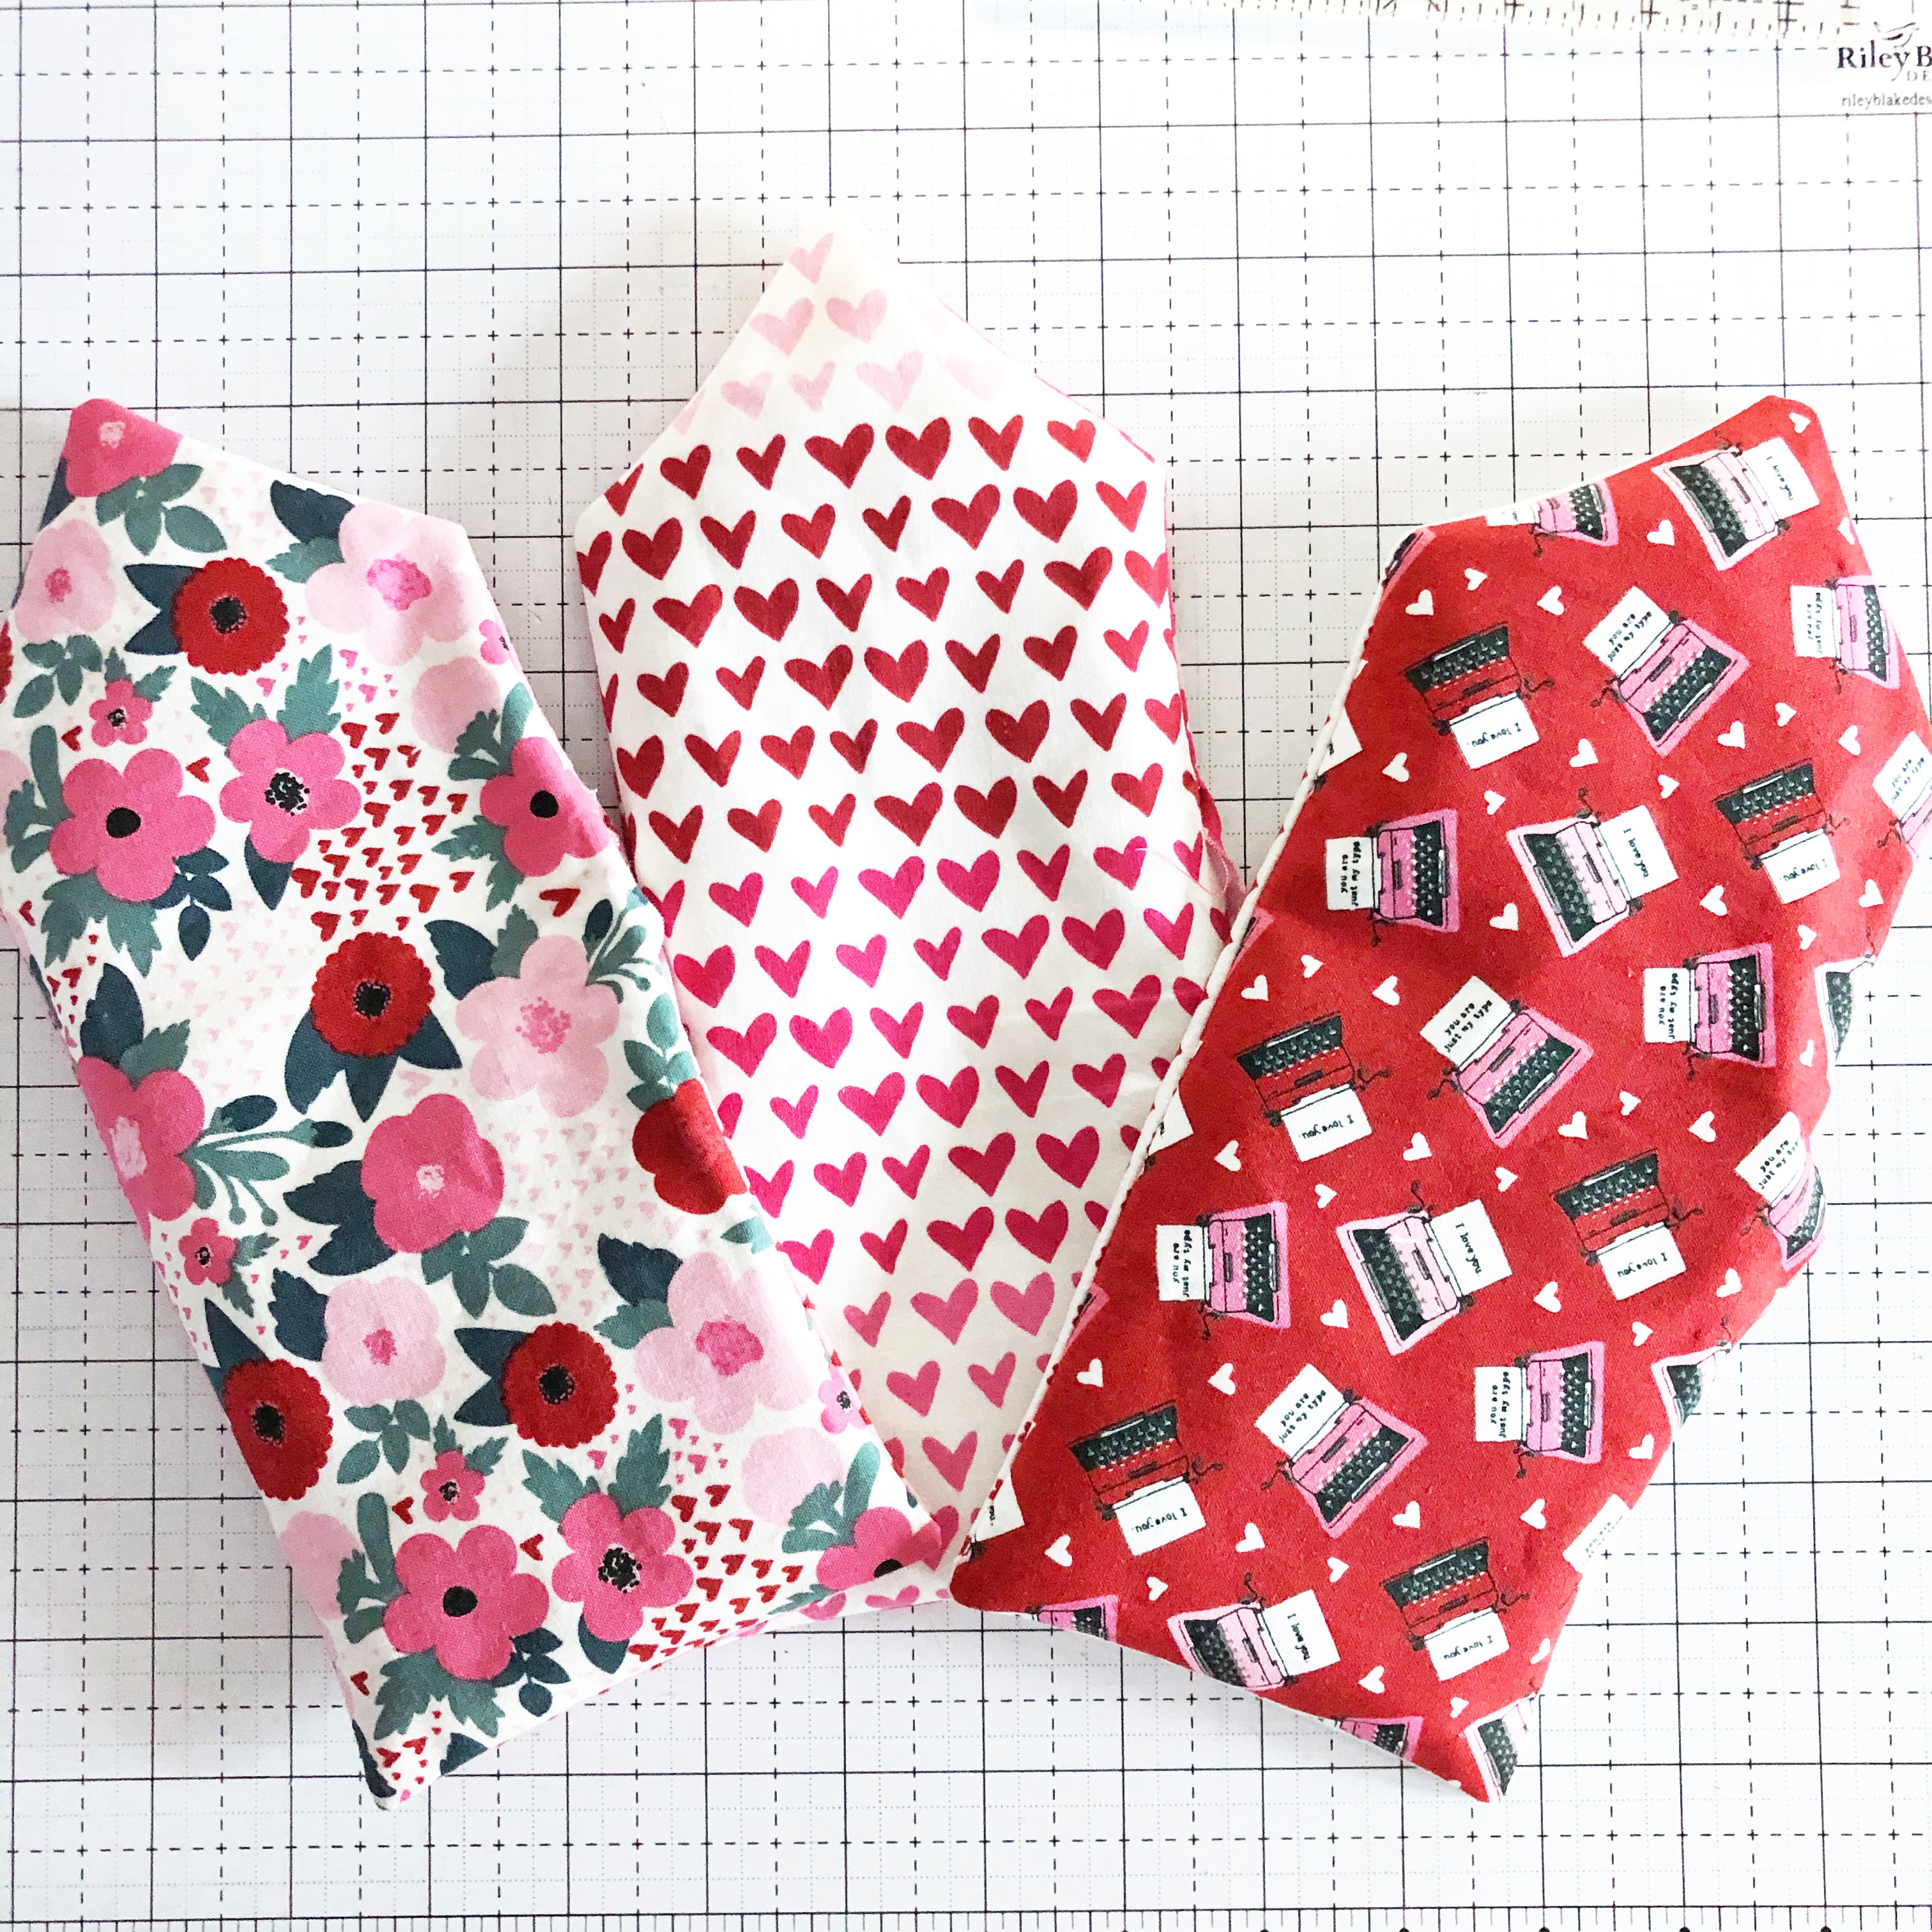 Fabric Envelope Tutorial: Turning the project